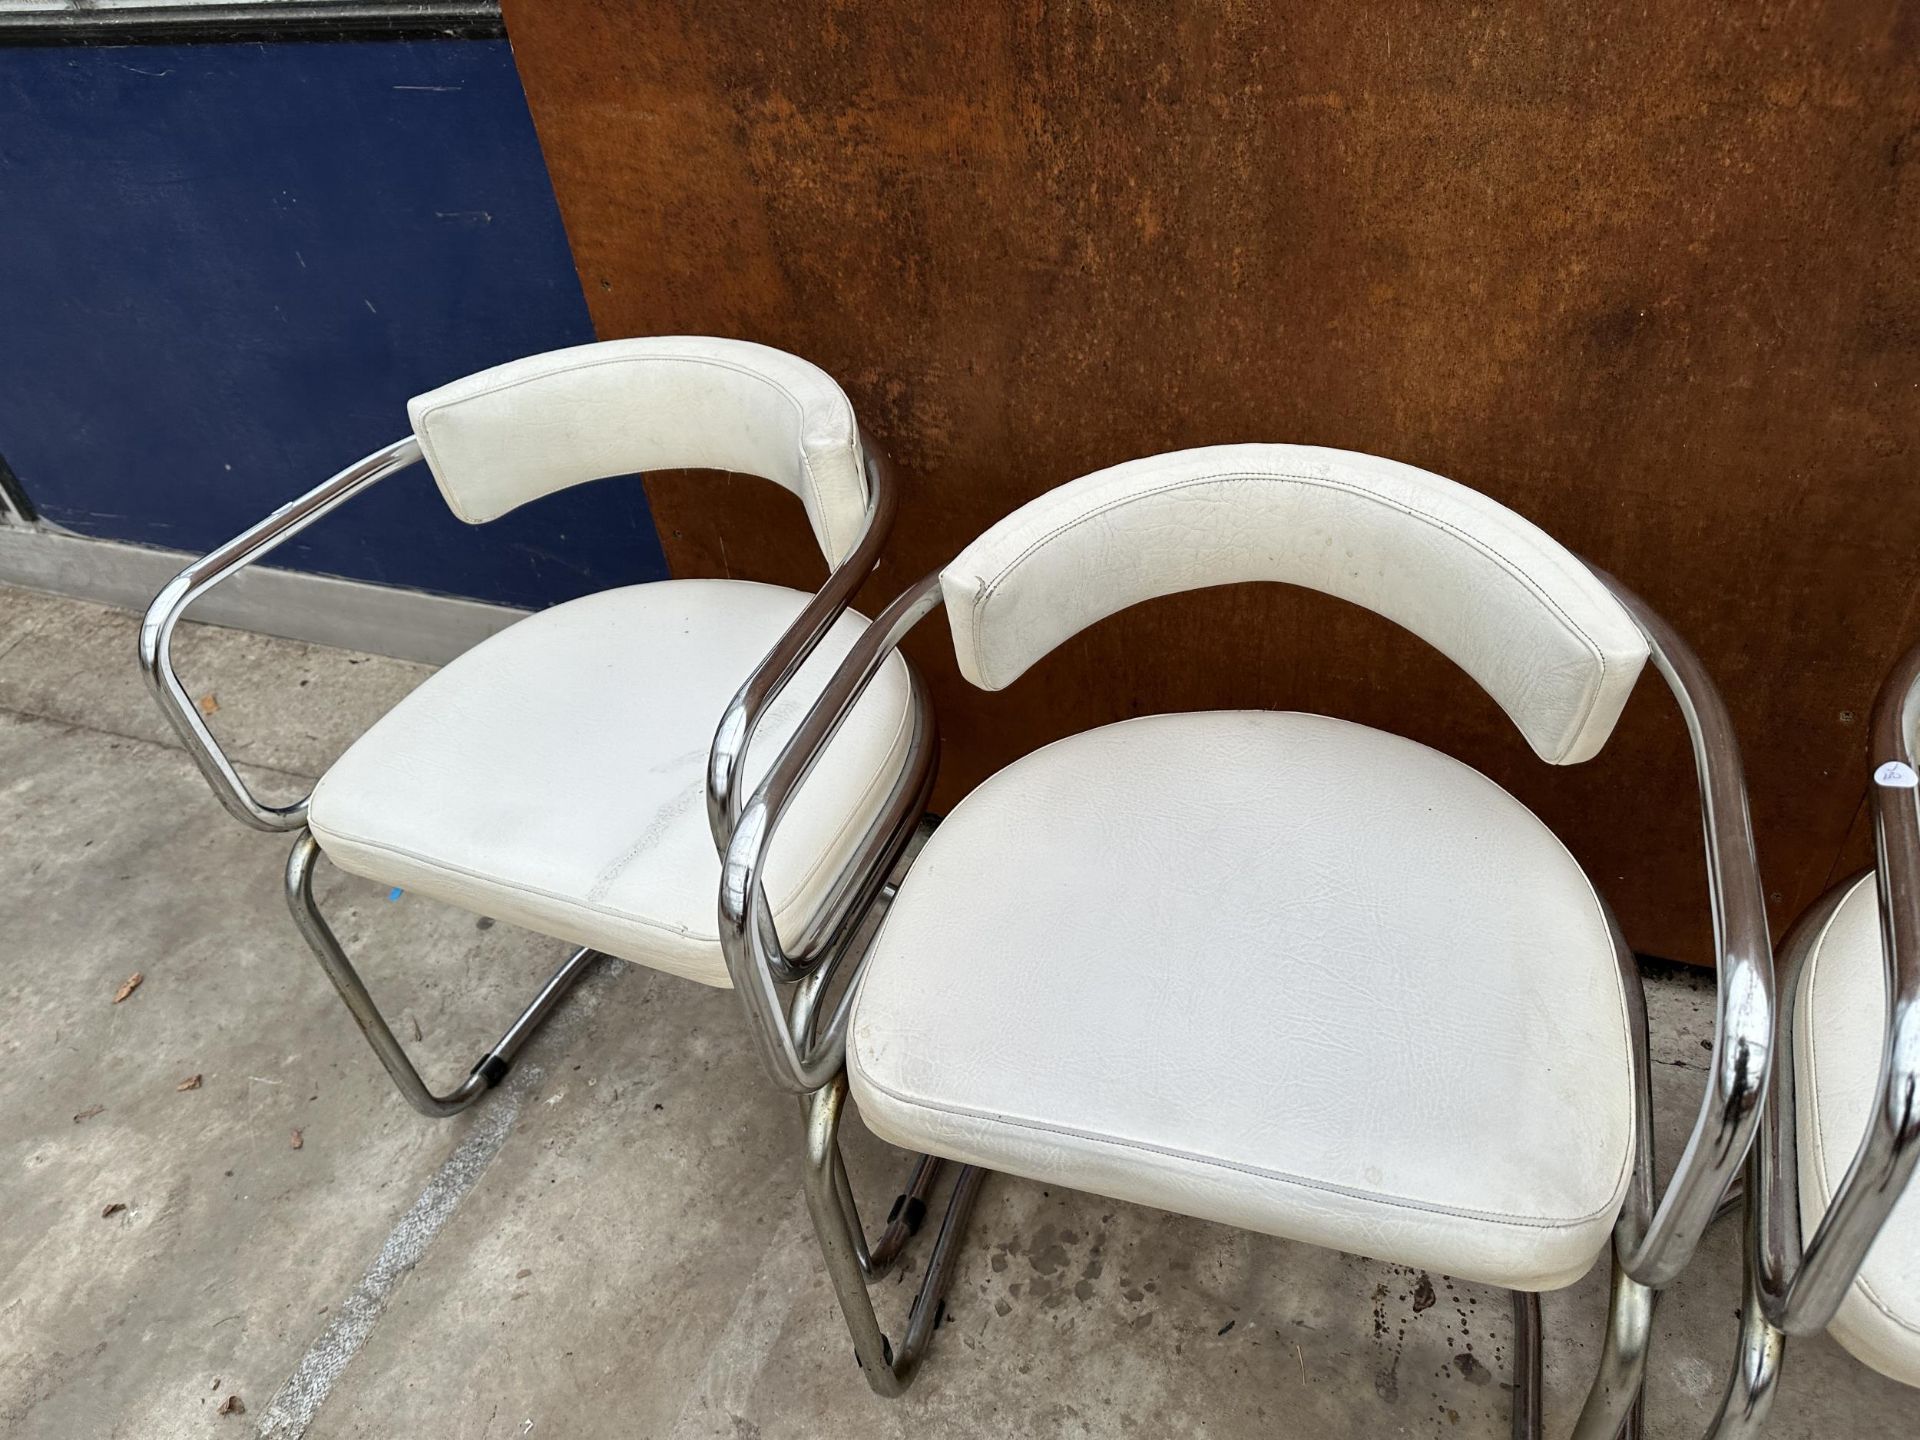 A SET OF FOUR TUBULAR CHROME ELBOW CHAIRS WITH WHITE LEATHER SEATS AND BACKS - Image 4 of 6